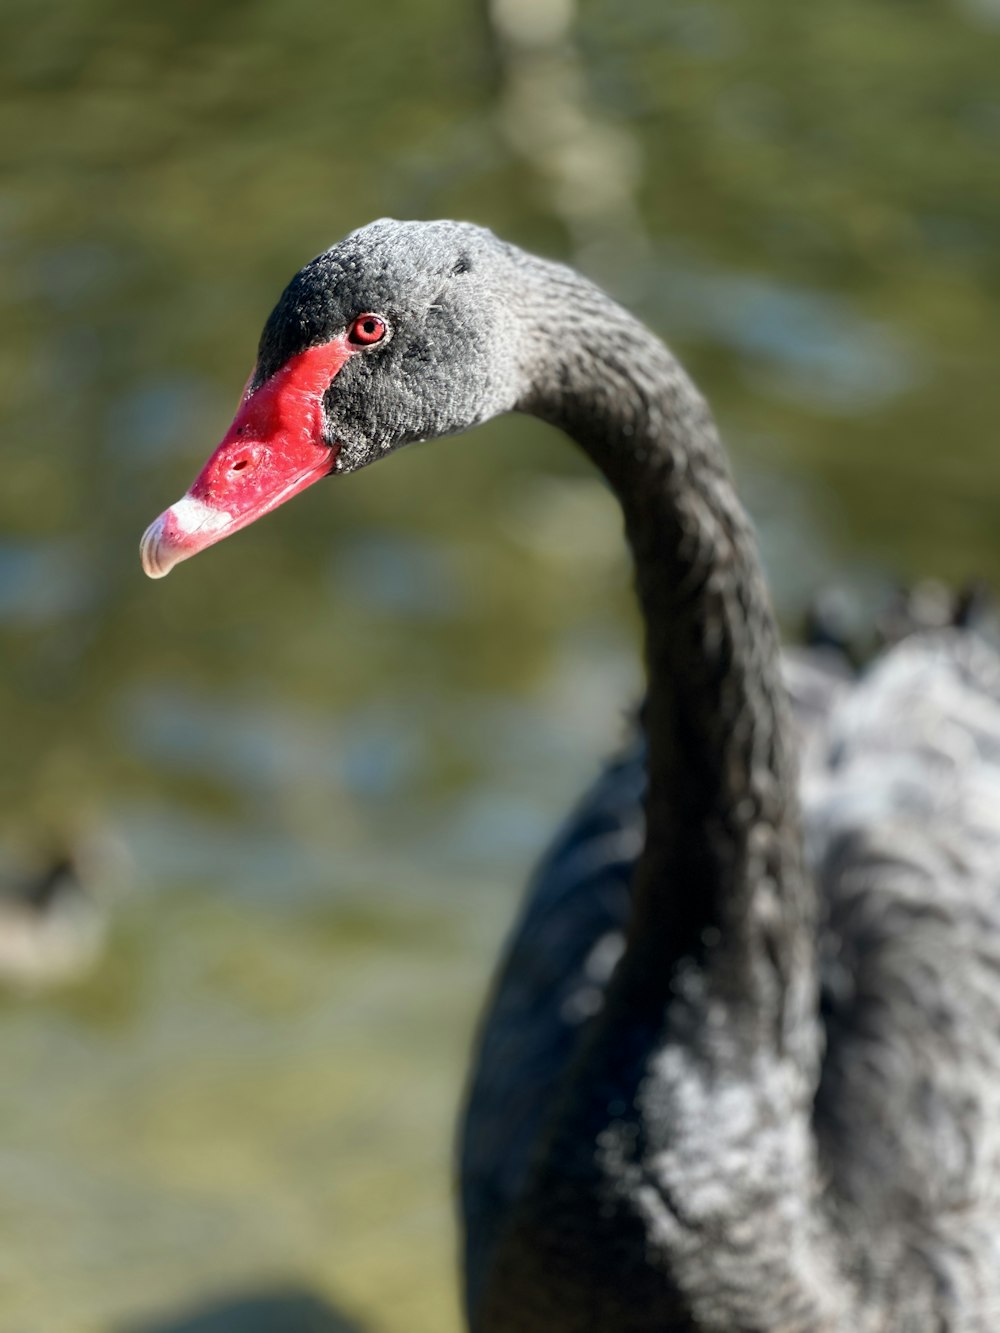 a close up of a black swan near a body of water